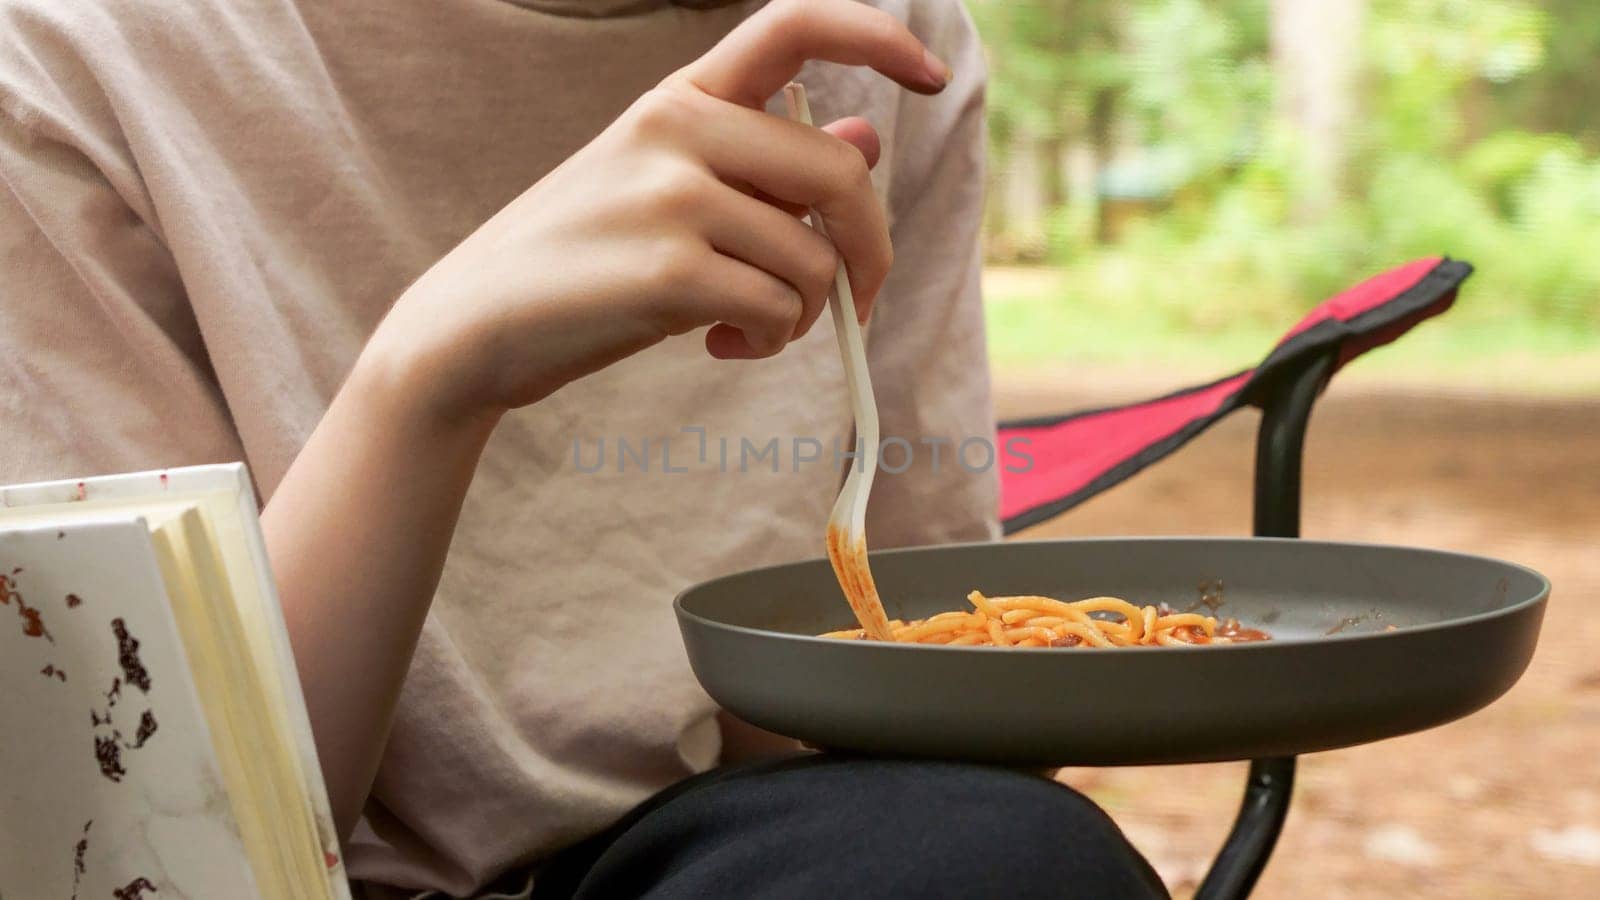 Unrecognizable young woman having summer picnic eating spaghetti outside in forest camping. Summer outdoors activities. Backyard picnic